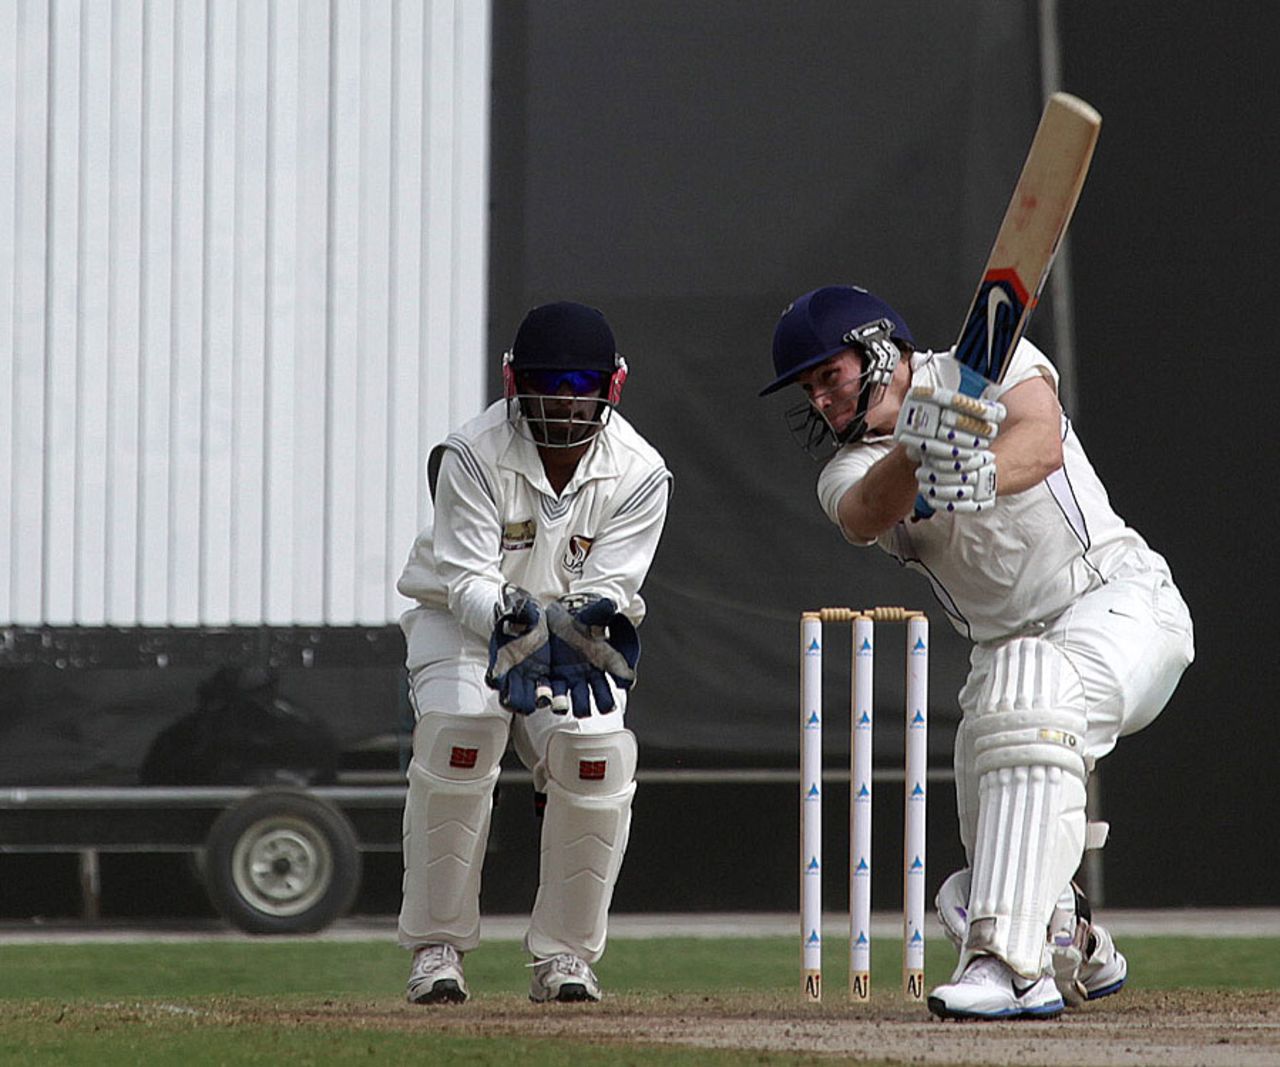 Richie Berrington drives on his way to a century, UAE v Scotland, Intercontinental Cup, 2nd day, Sharjah, February 17, 2012